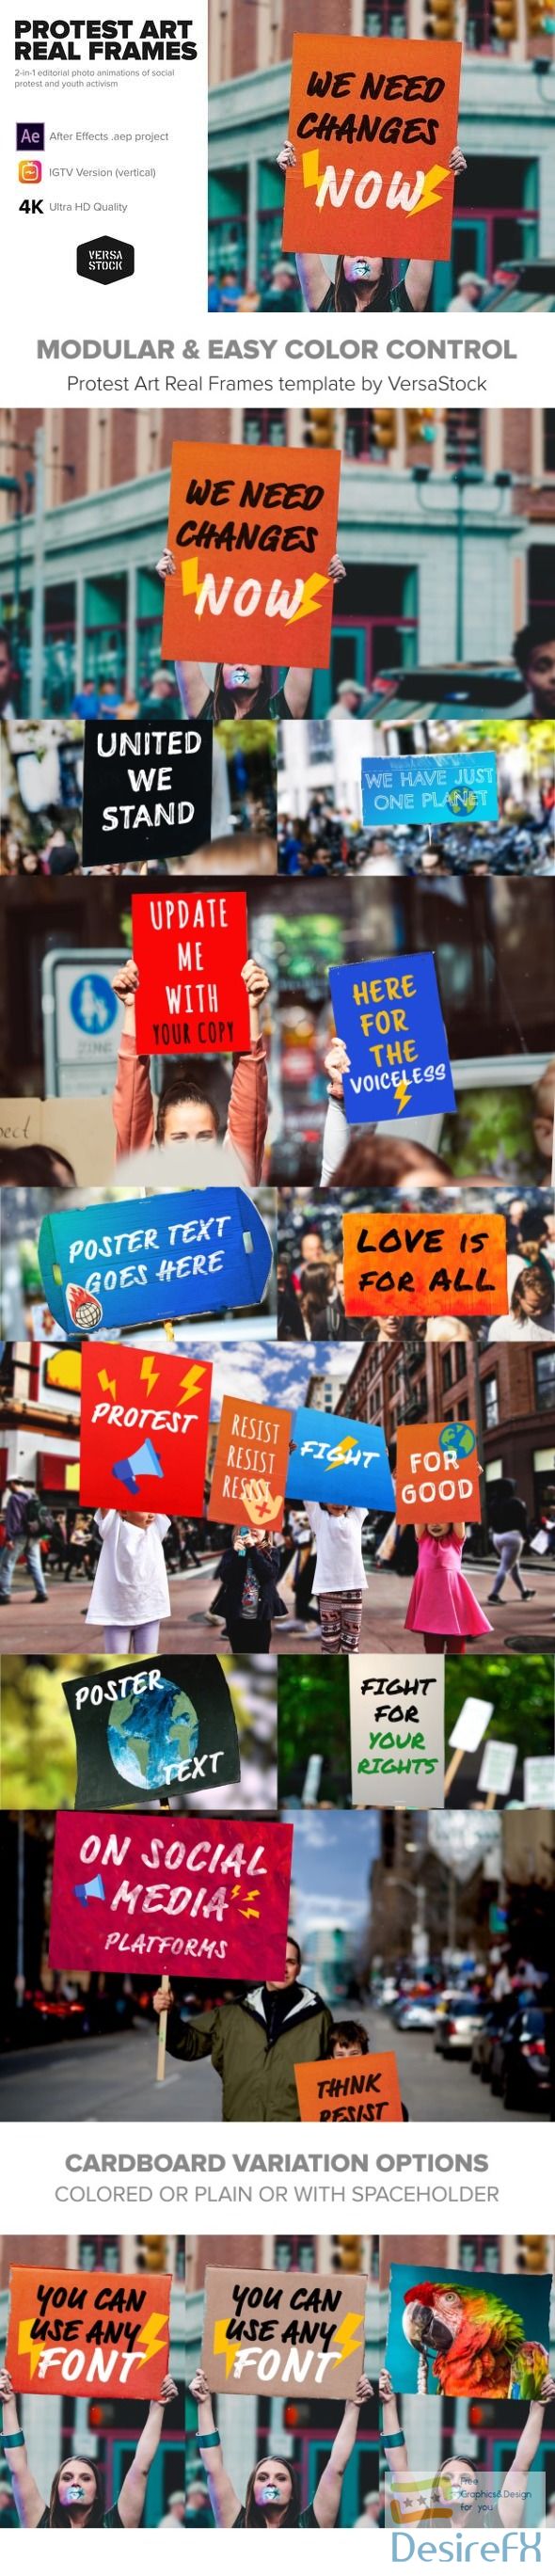 Videohive Protest Art Real Frames 26058272 - After Effects Project Files